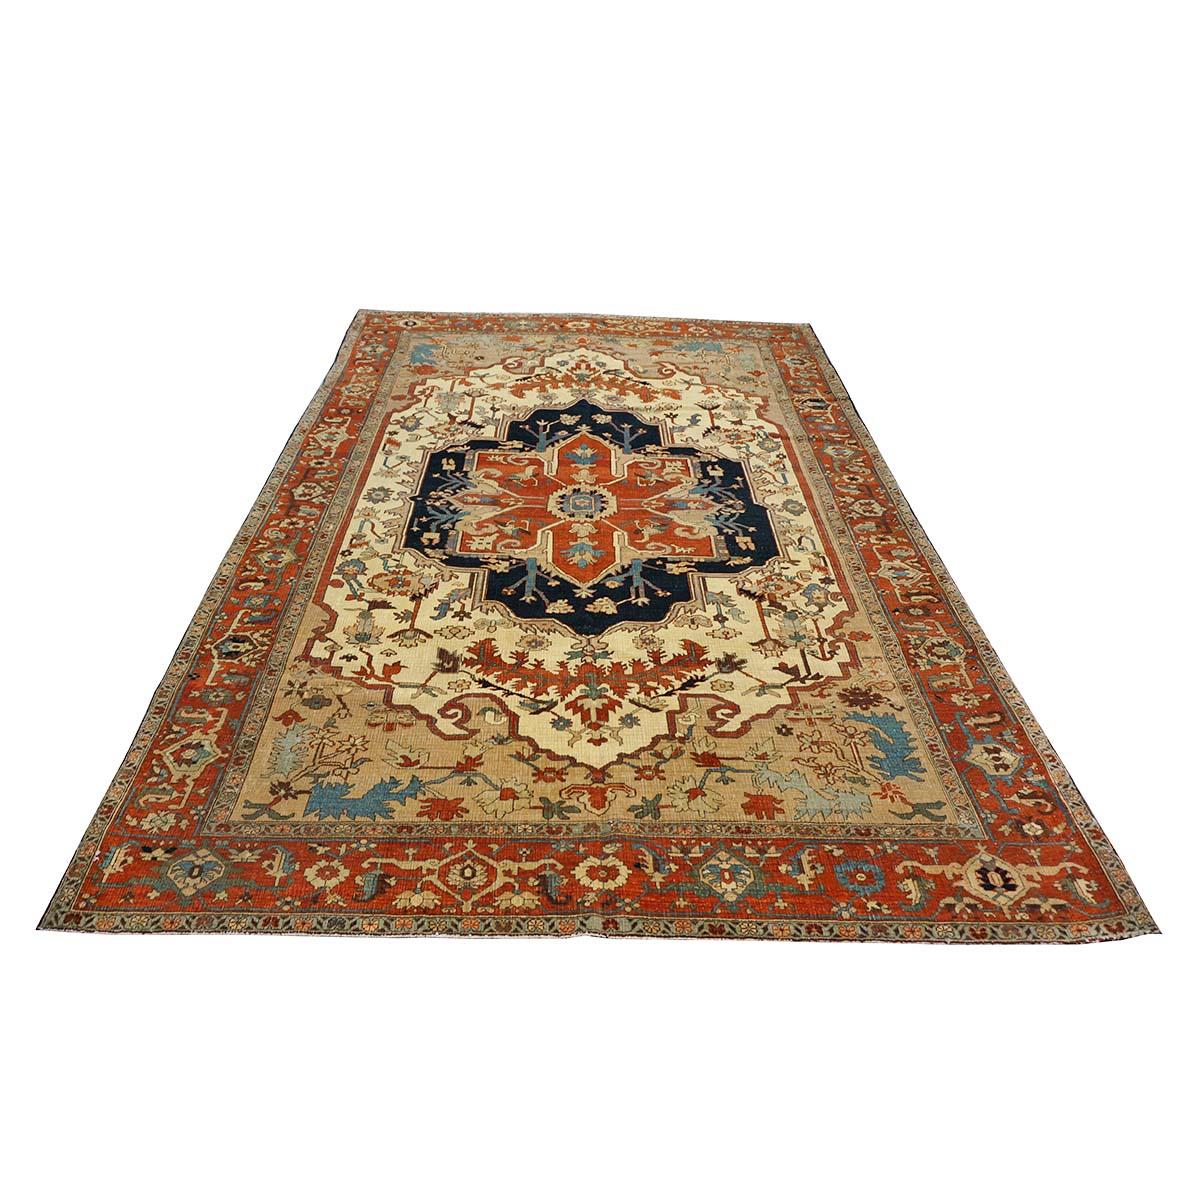  Ashly Fine Rugs presents a new antique reproduction Persian Serapi 7x11 handmade area rug. Persian Serapi rugs are perhaps the most desired rugs by both connoisseurs and interior designers. Made with all vegetable-dyed, handspun wool and entirely